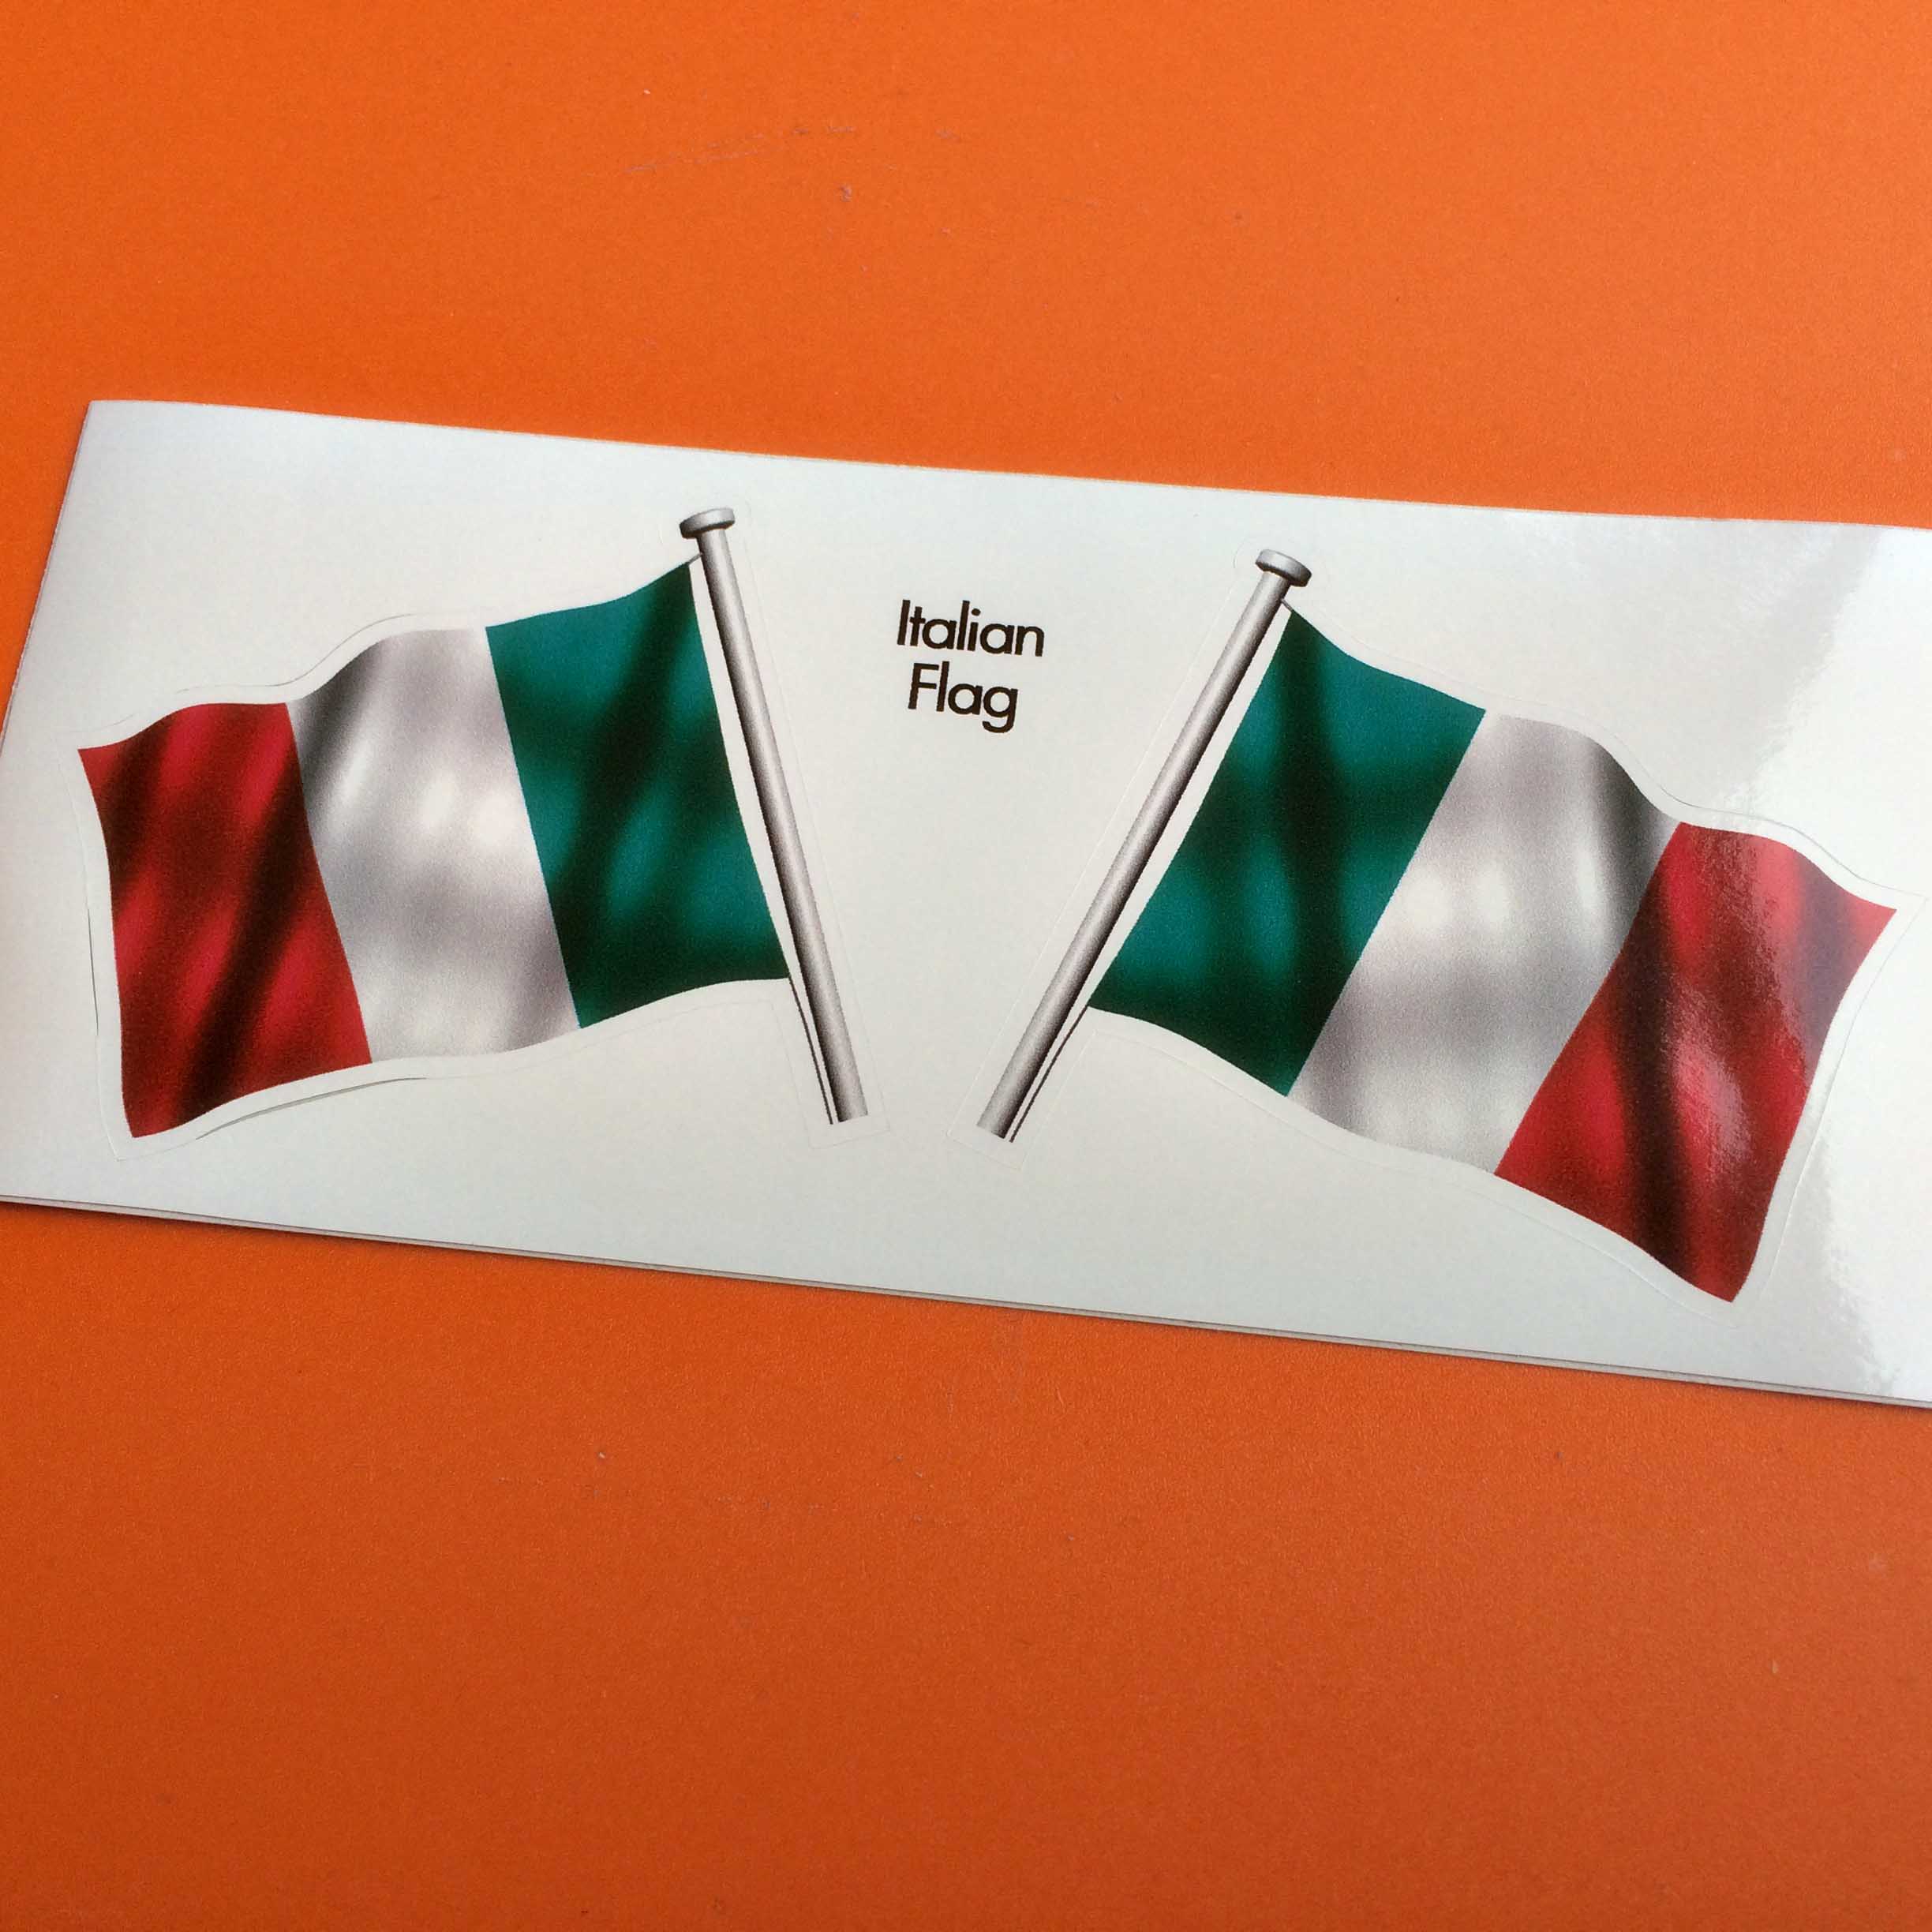 ITALY ITALIAN FLAG STICKERS. Three vertical columns of green, white and red. The national colours of Italy.